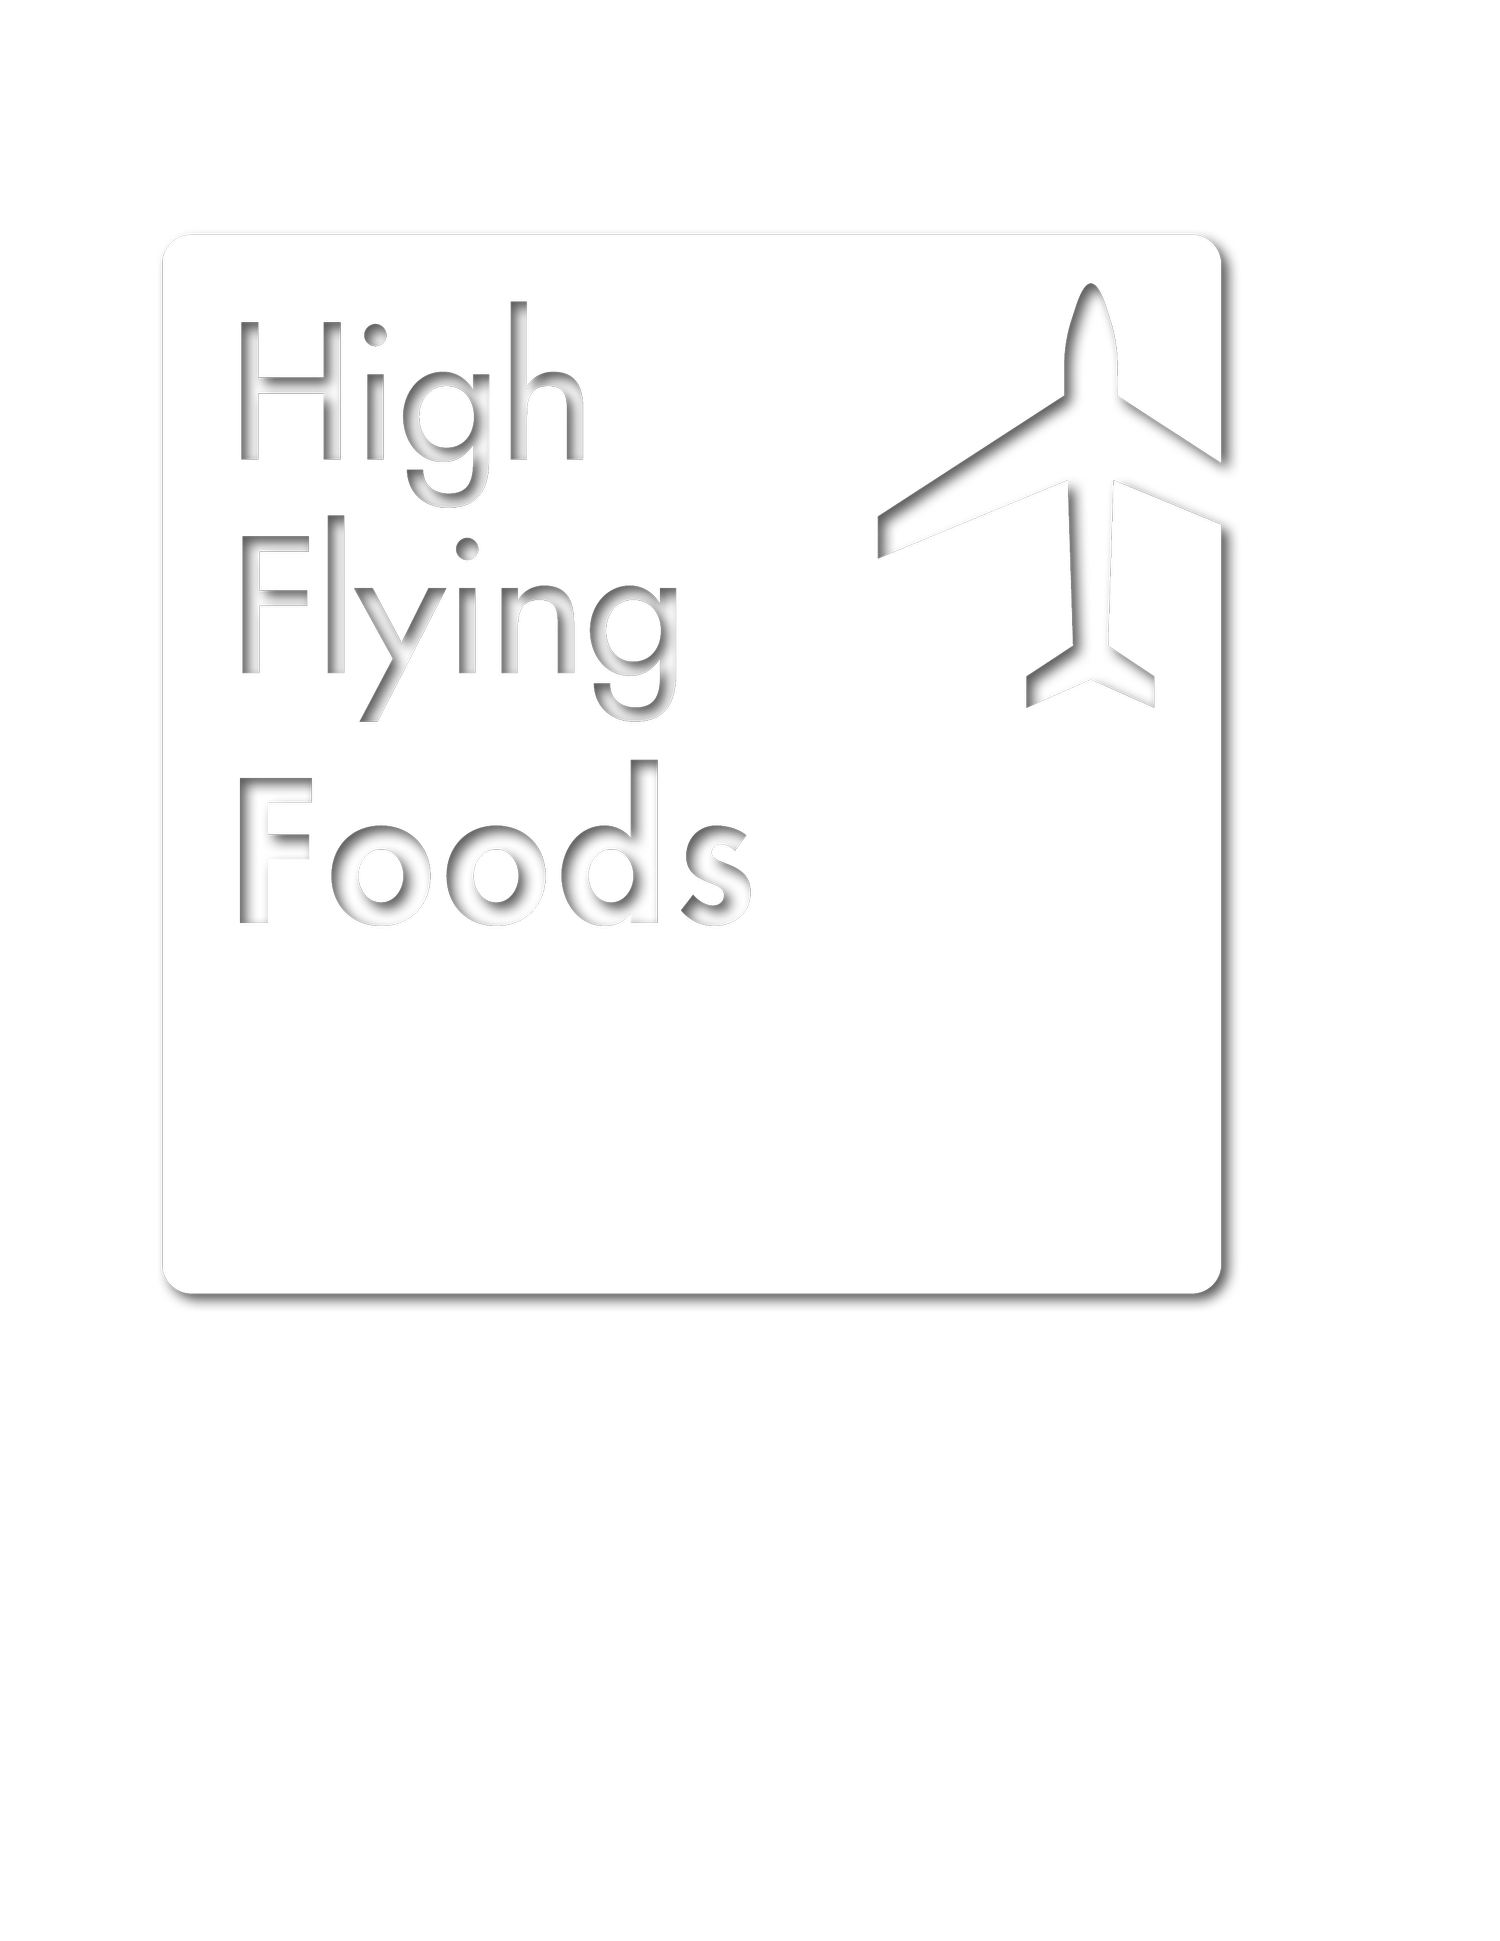 High Flying Foods